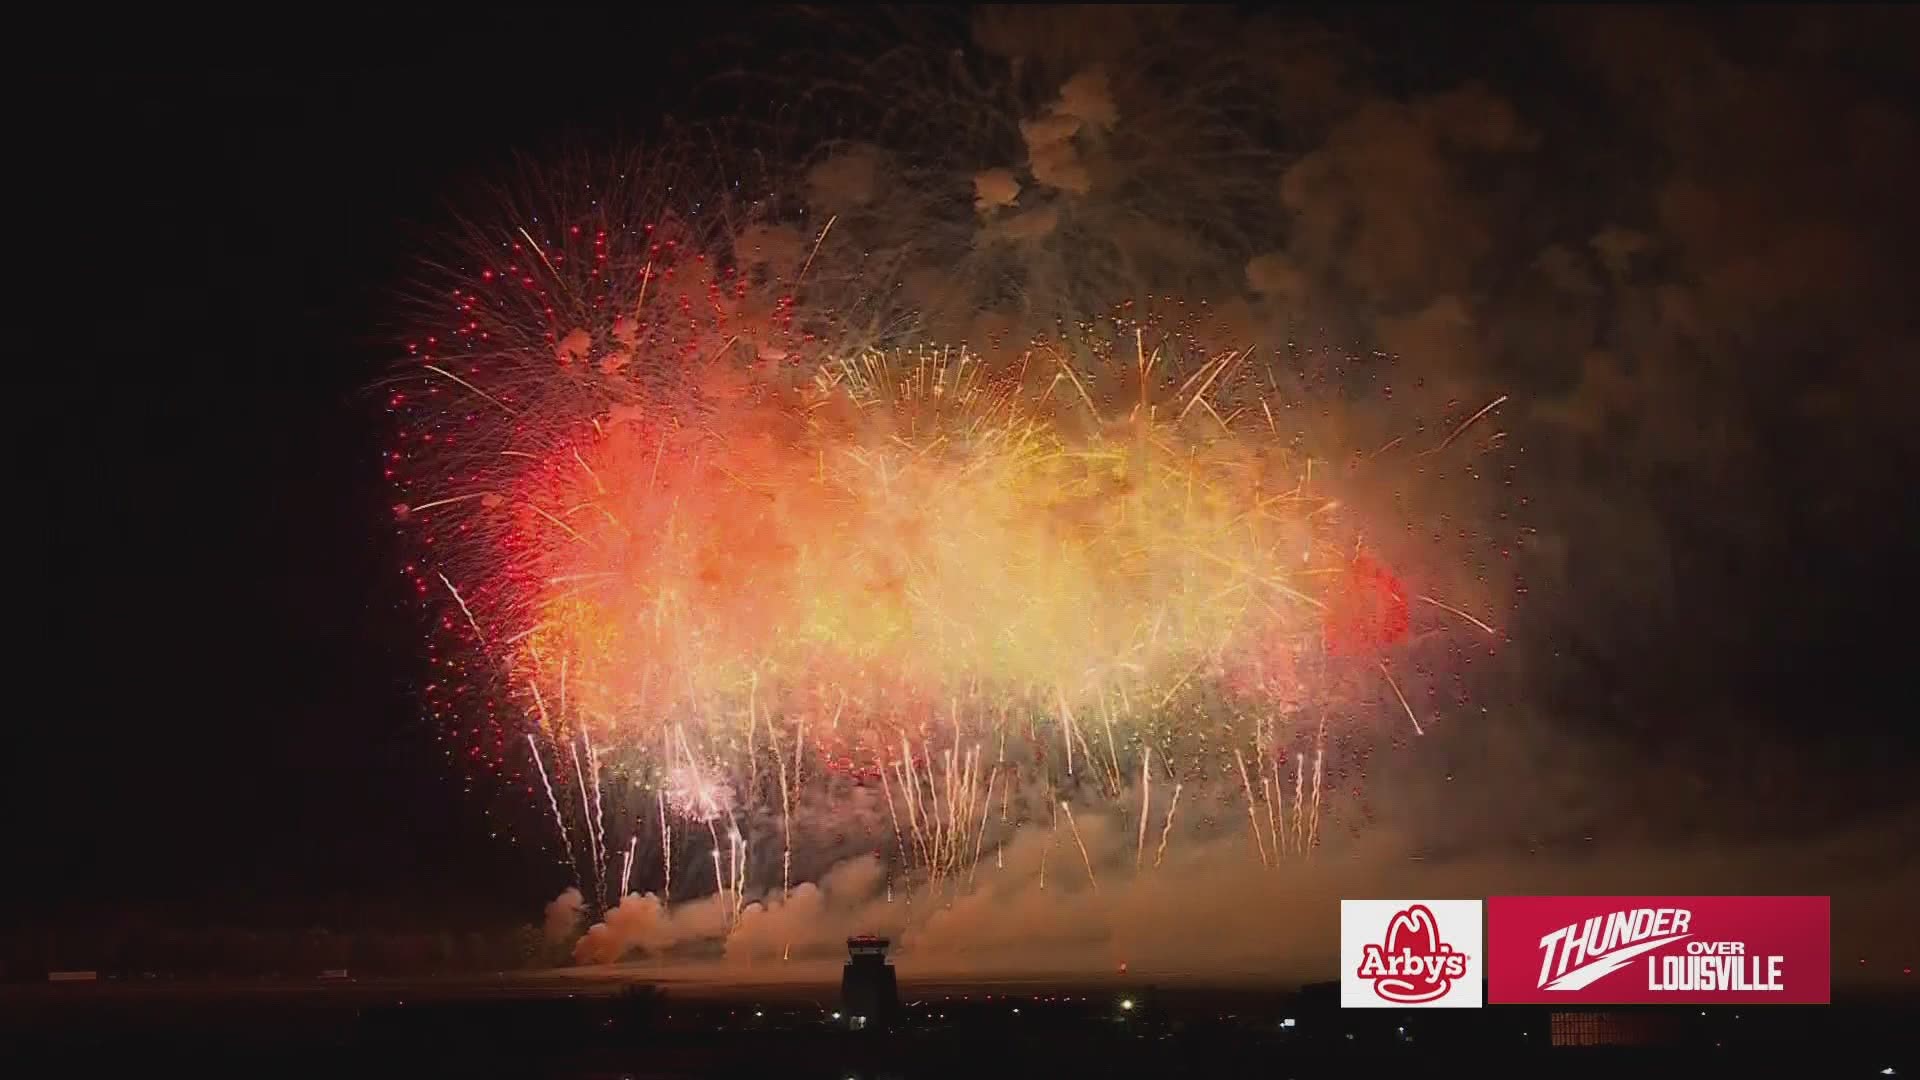 Finale to the 2021 Thunder Over Louisville fireworks display.